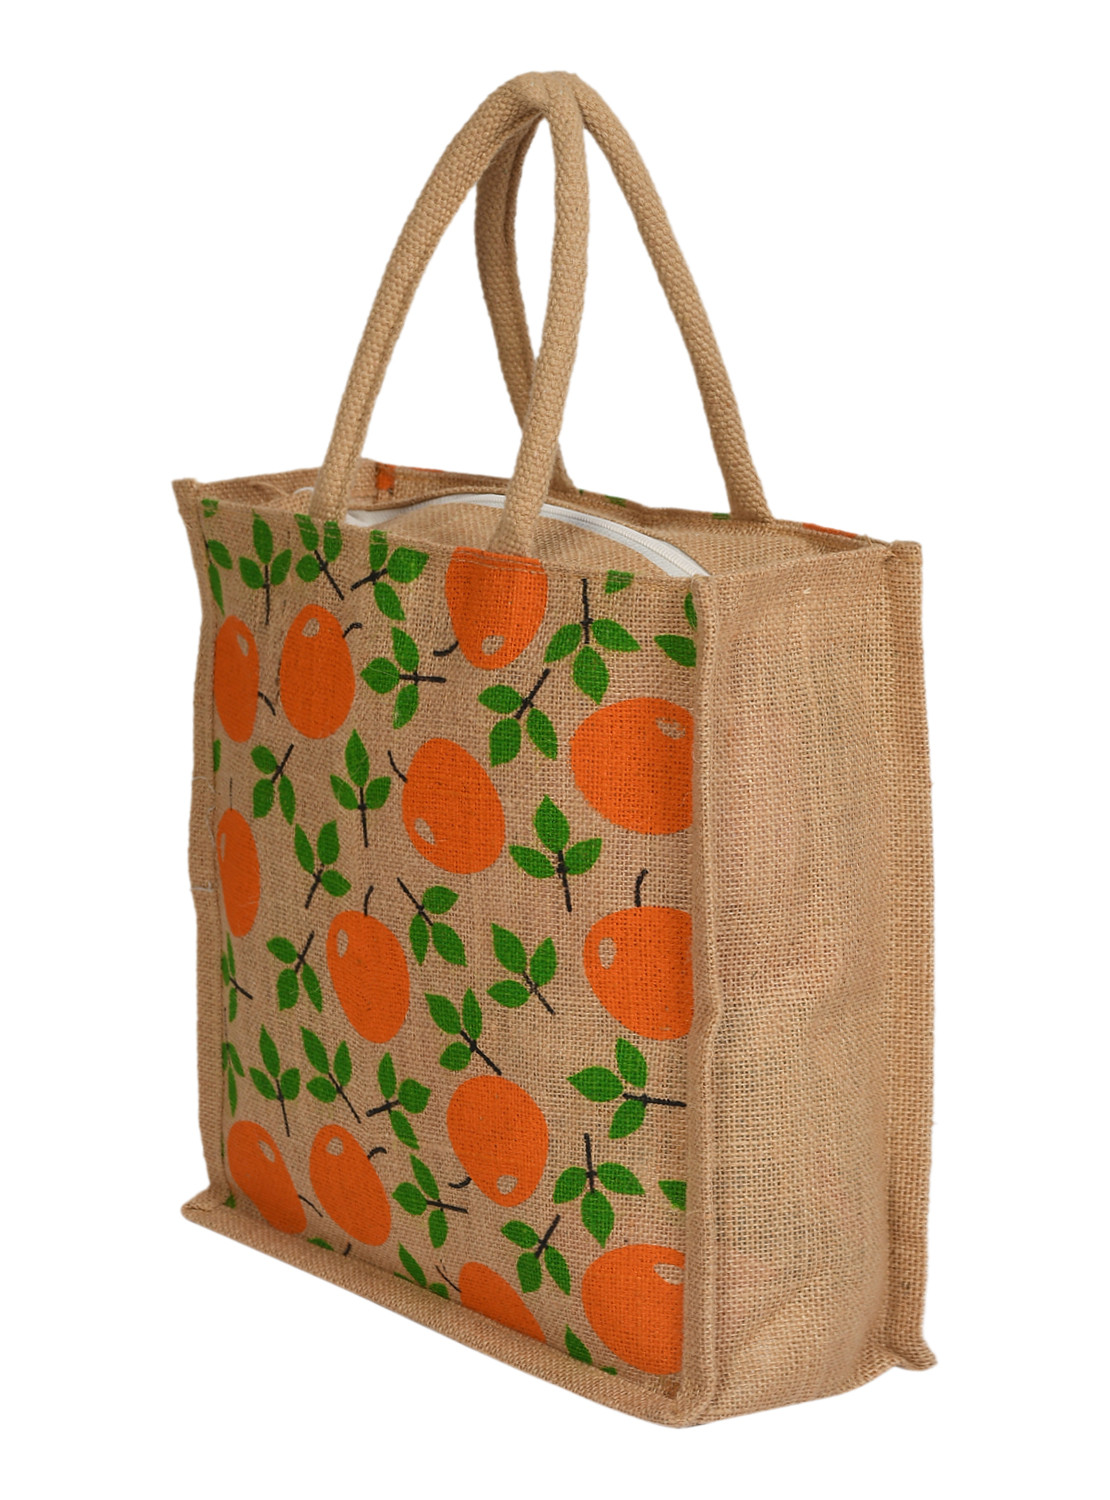 Kuber Industries Jute Reusable Eco-Friendly Hand Bag/Grocery Bag For Man, Woman With Handle Pack Of 4 (Multicolour) 54KM4365